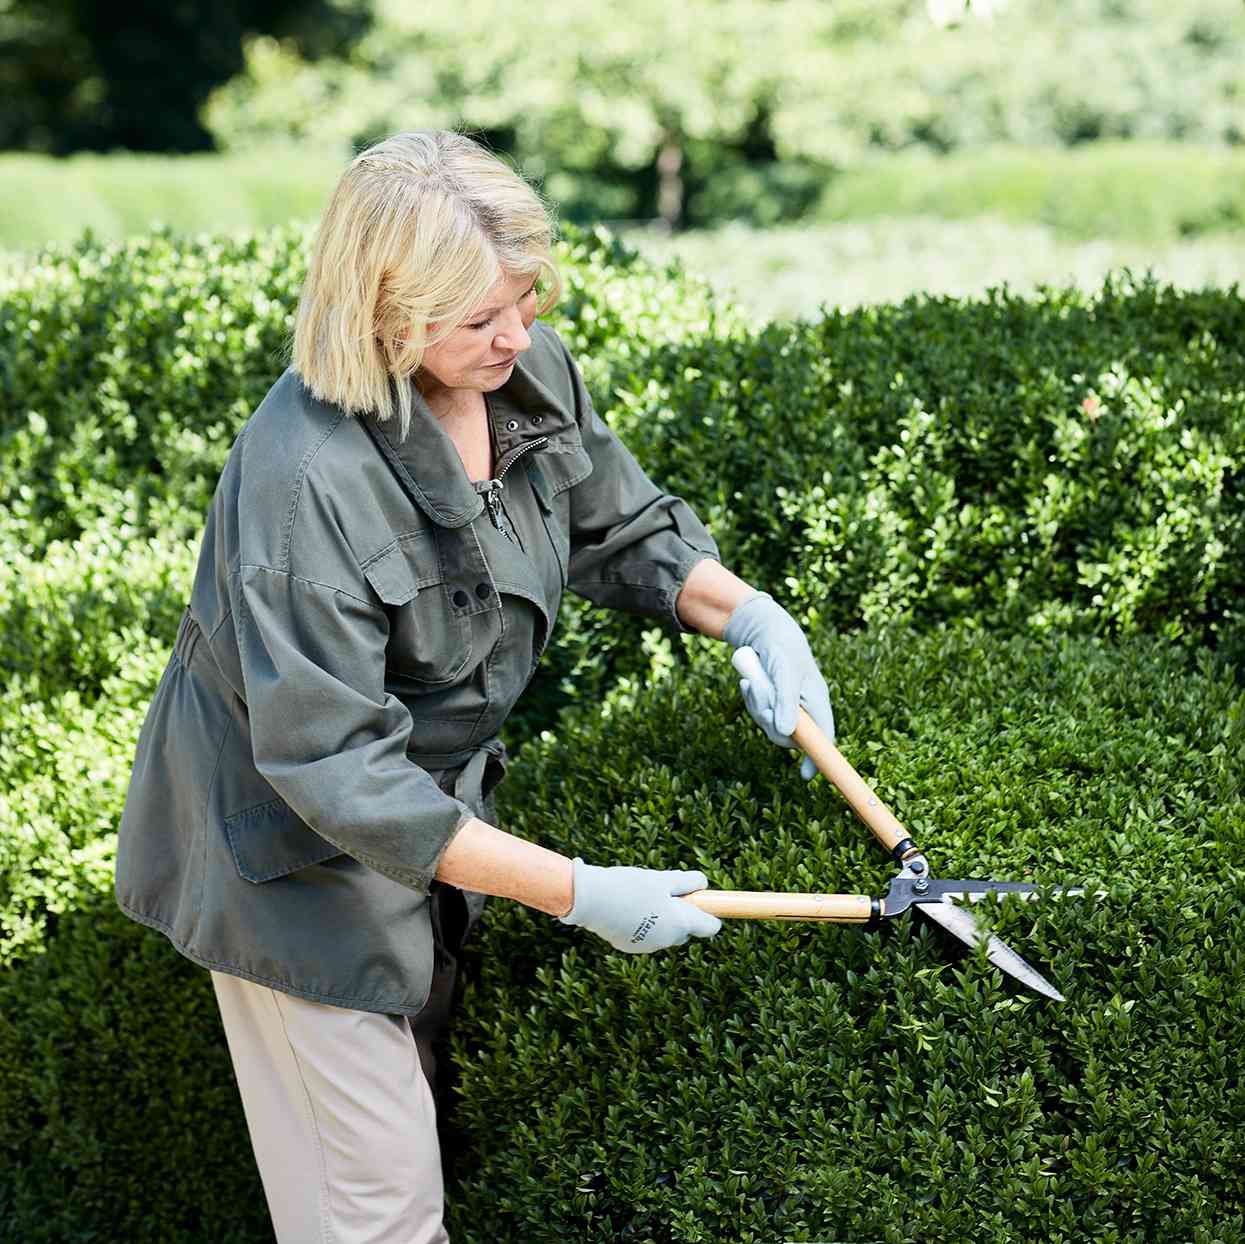 Garden Hedge Shears for Trimming and Shaping Borders,Decorative Shrubs and Bushe 